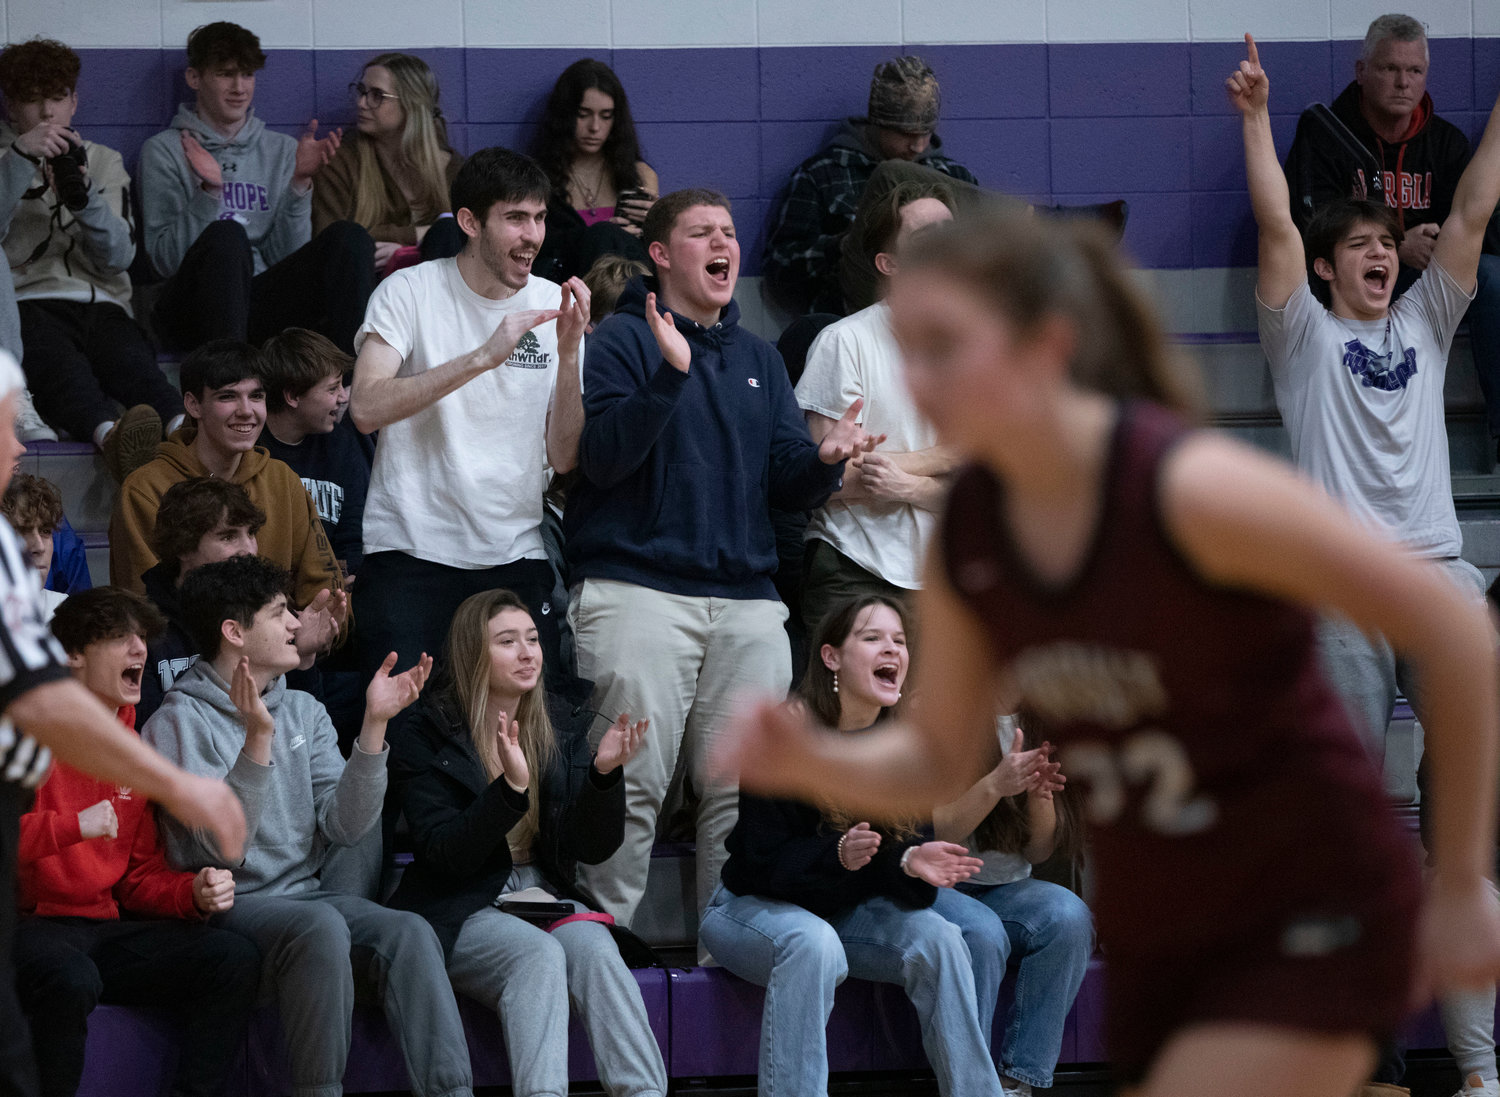 James Rustici, George Piper, Jamison Canario, Nick Andreozzi and the dog pound cheer on the Huskies.